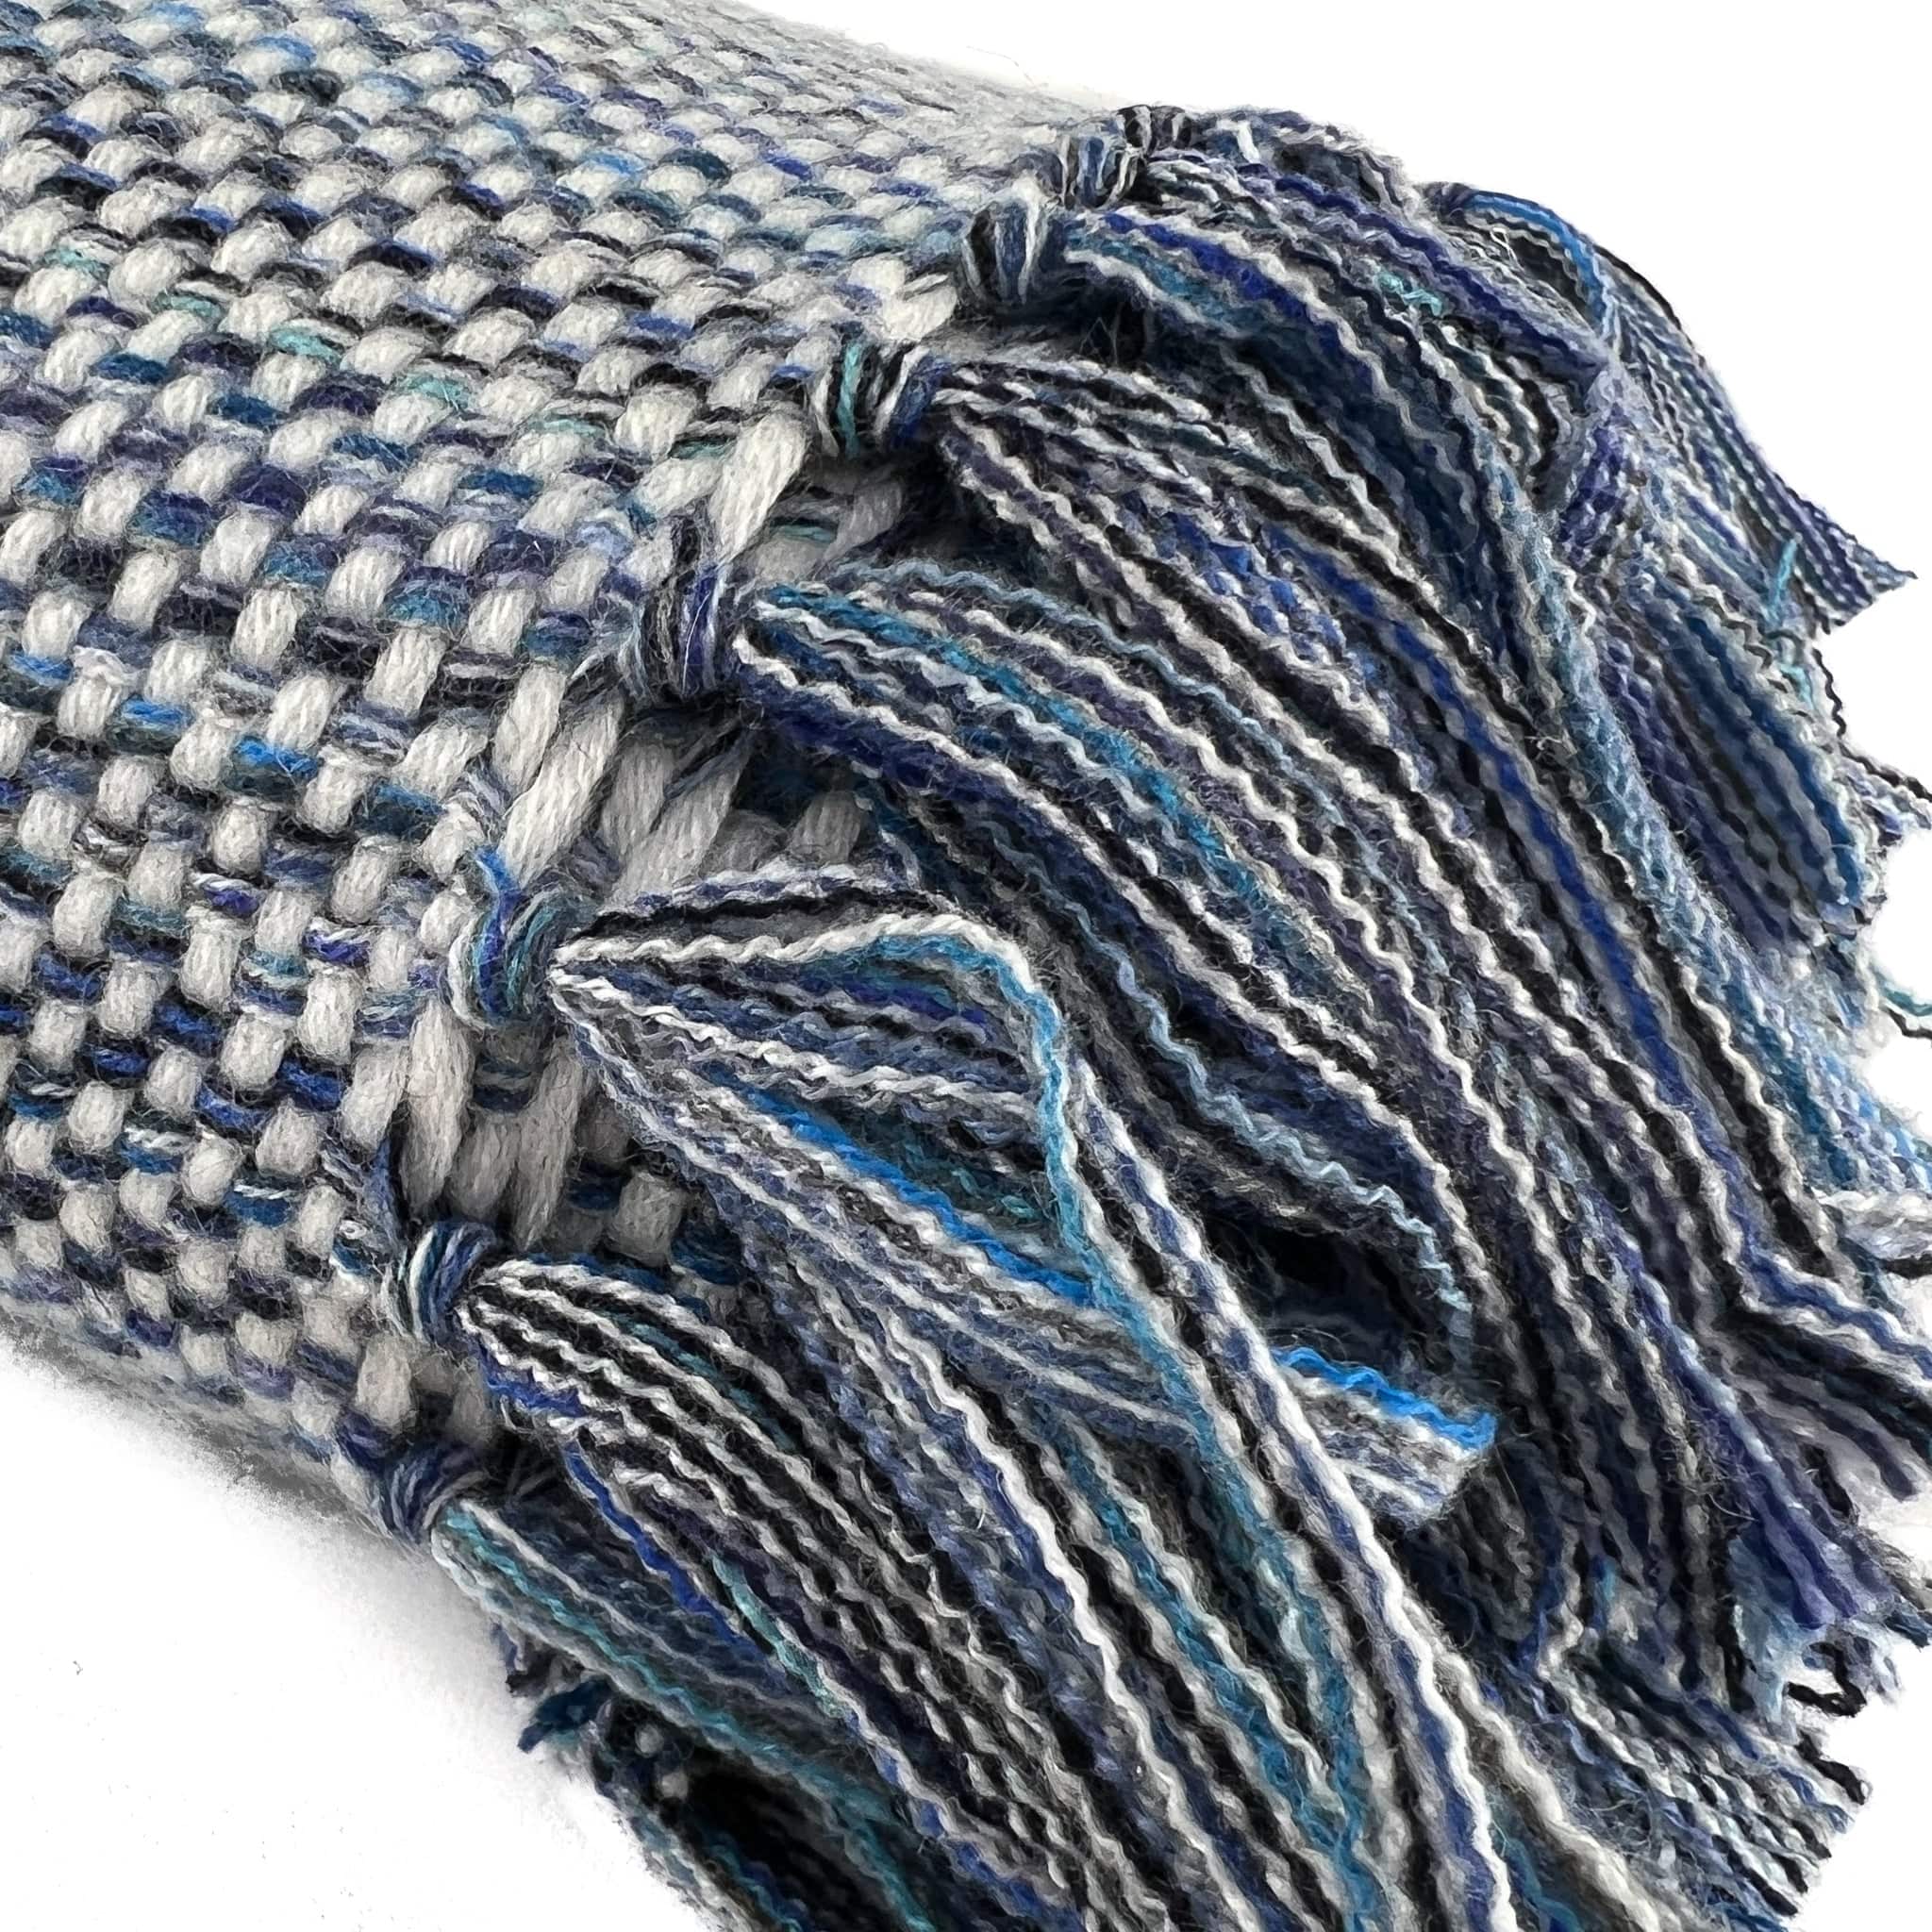 Close-up detail of an Italian made Cashmere throw with a white weft and different shades of blue warp, folded on a white background with handknotted multiple shades of blue tassels showing in front